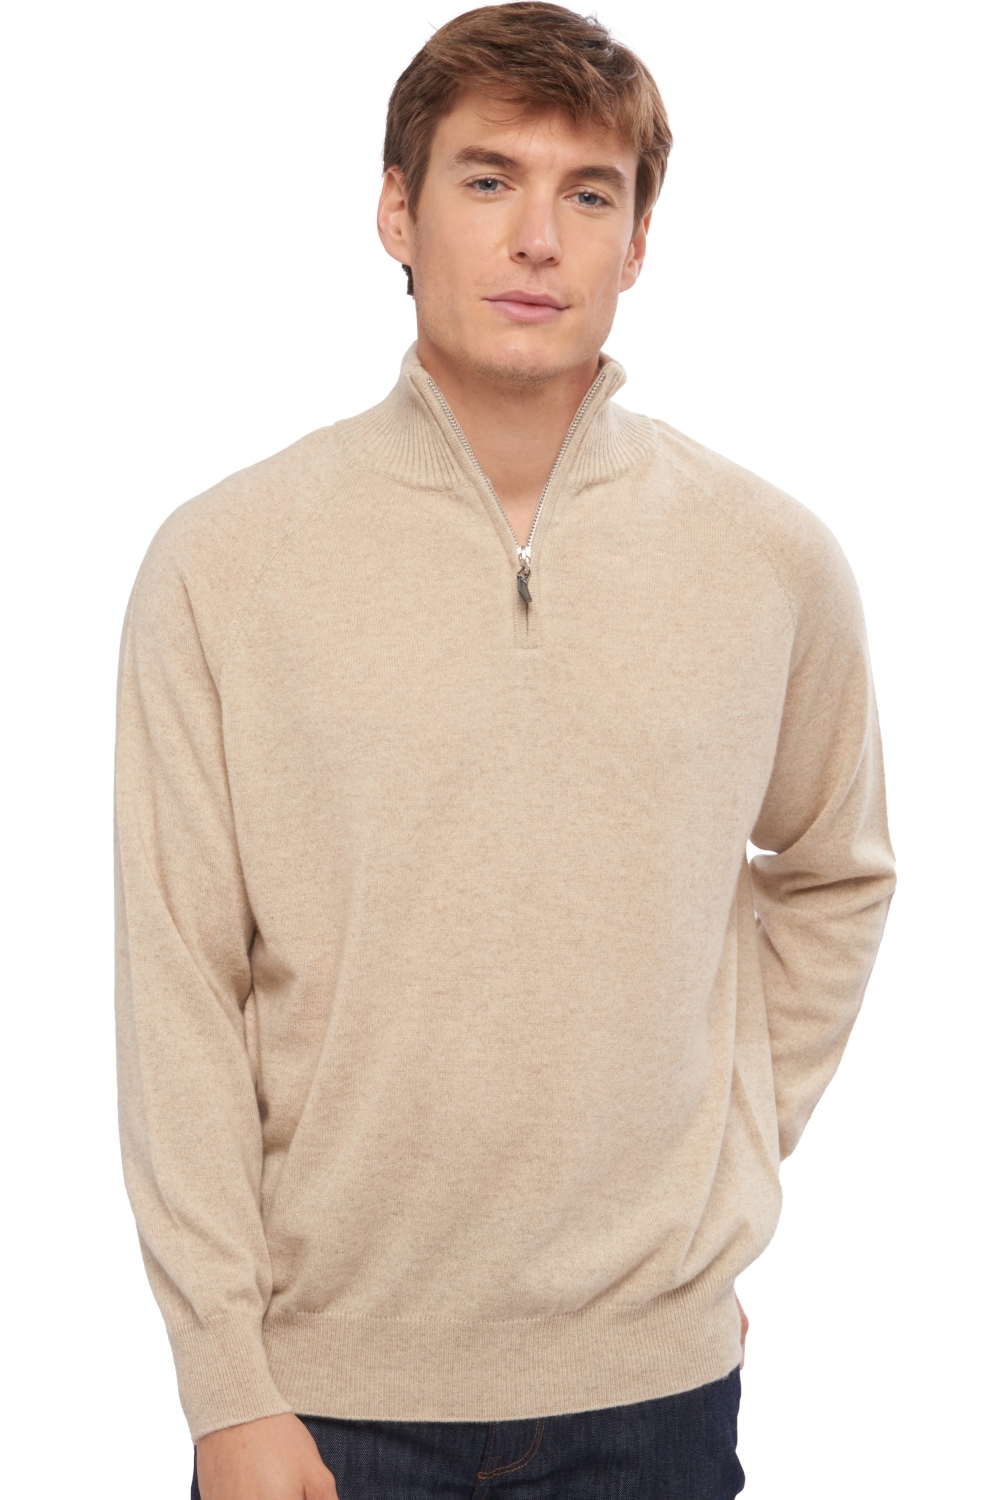 Cachemire pull homme natural vez natural winter dawn 2xl